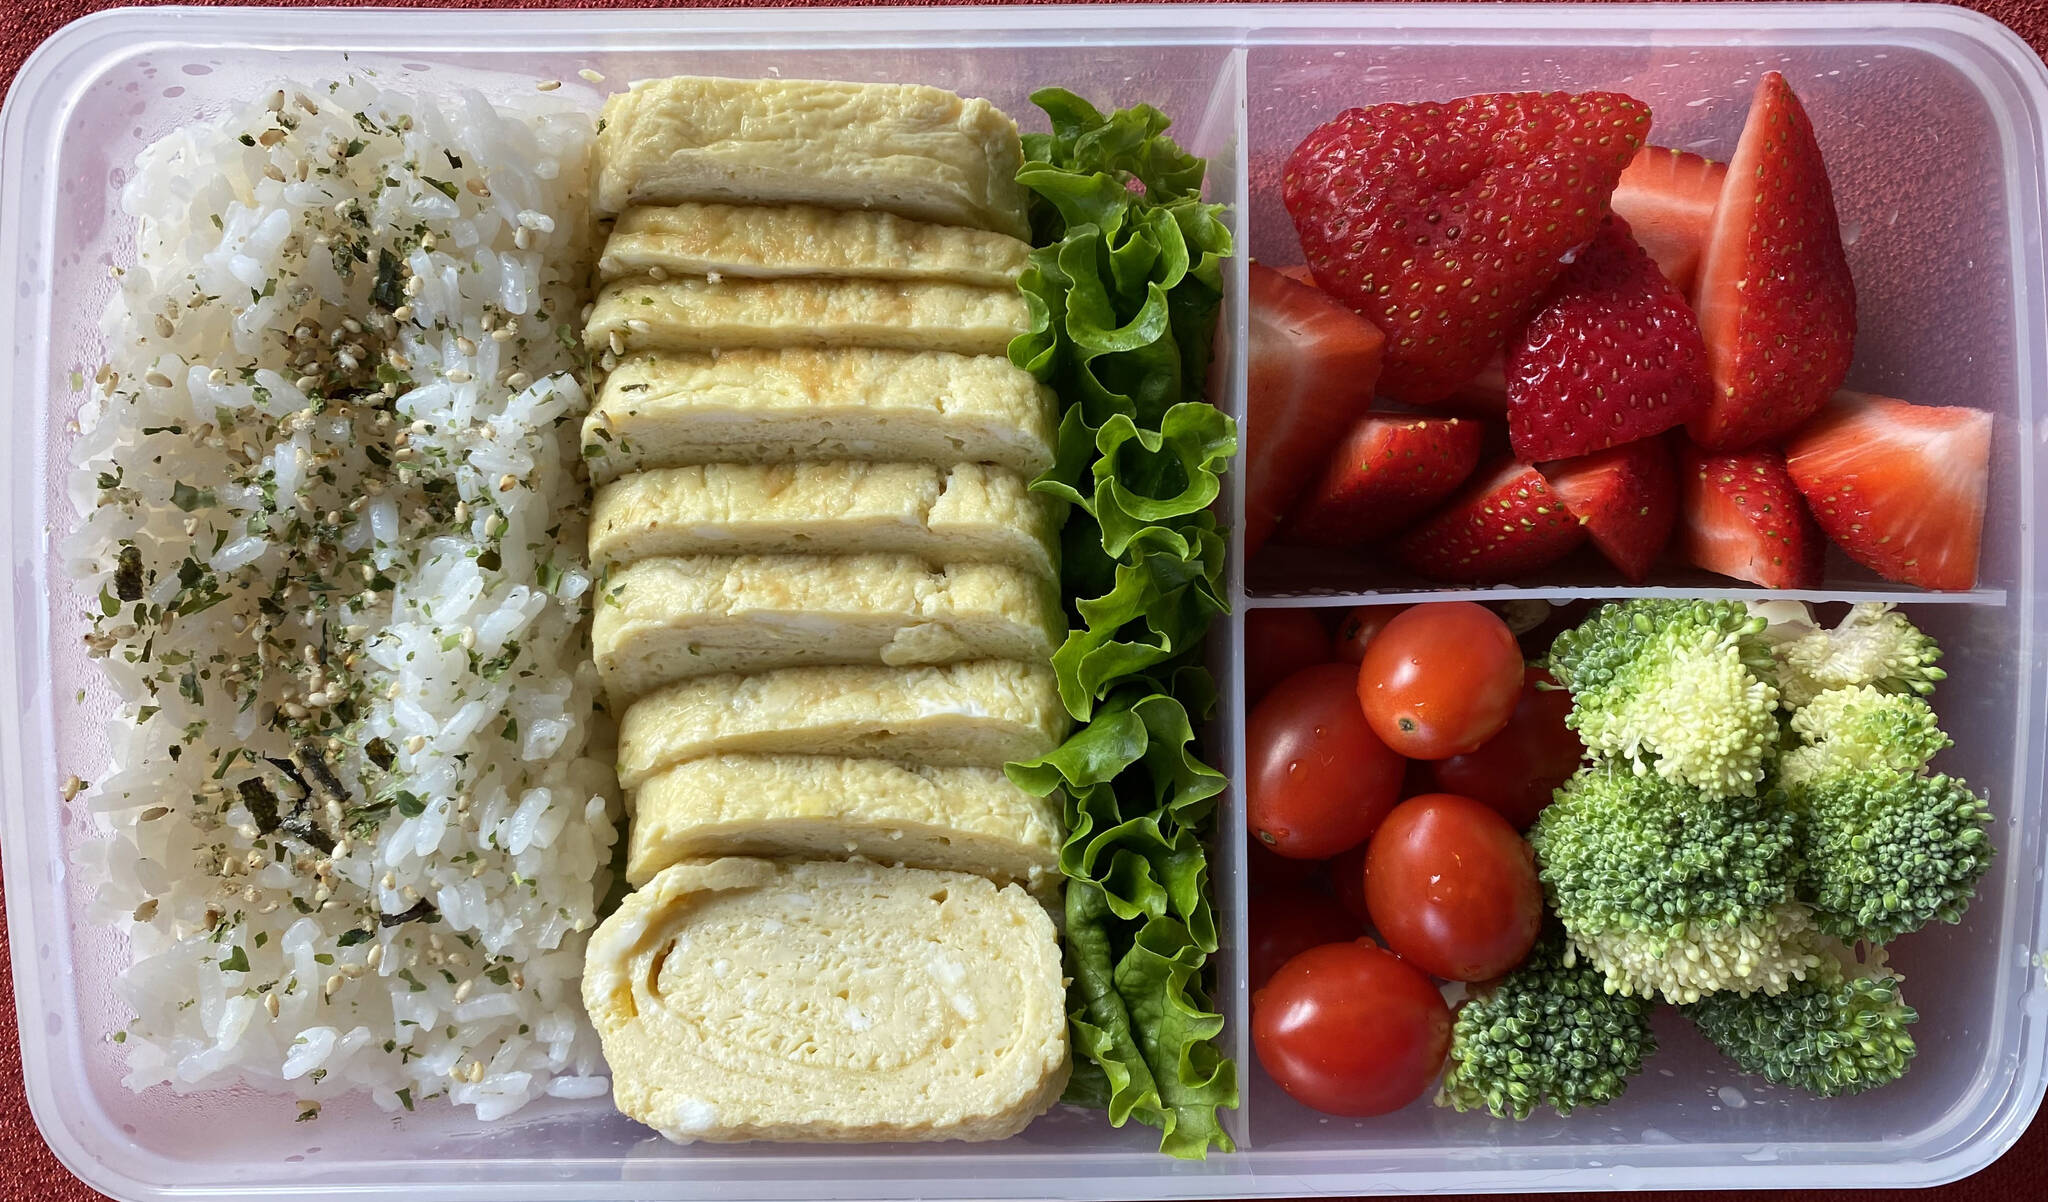 This bento box includes rice, fruit, vegetables and tomagoyaki, or Japanese rolled omelet. (Photo by Tressa Dale/Peninsula Clarion)